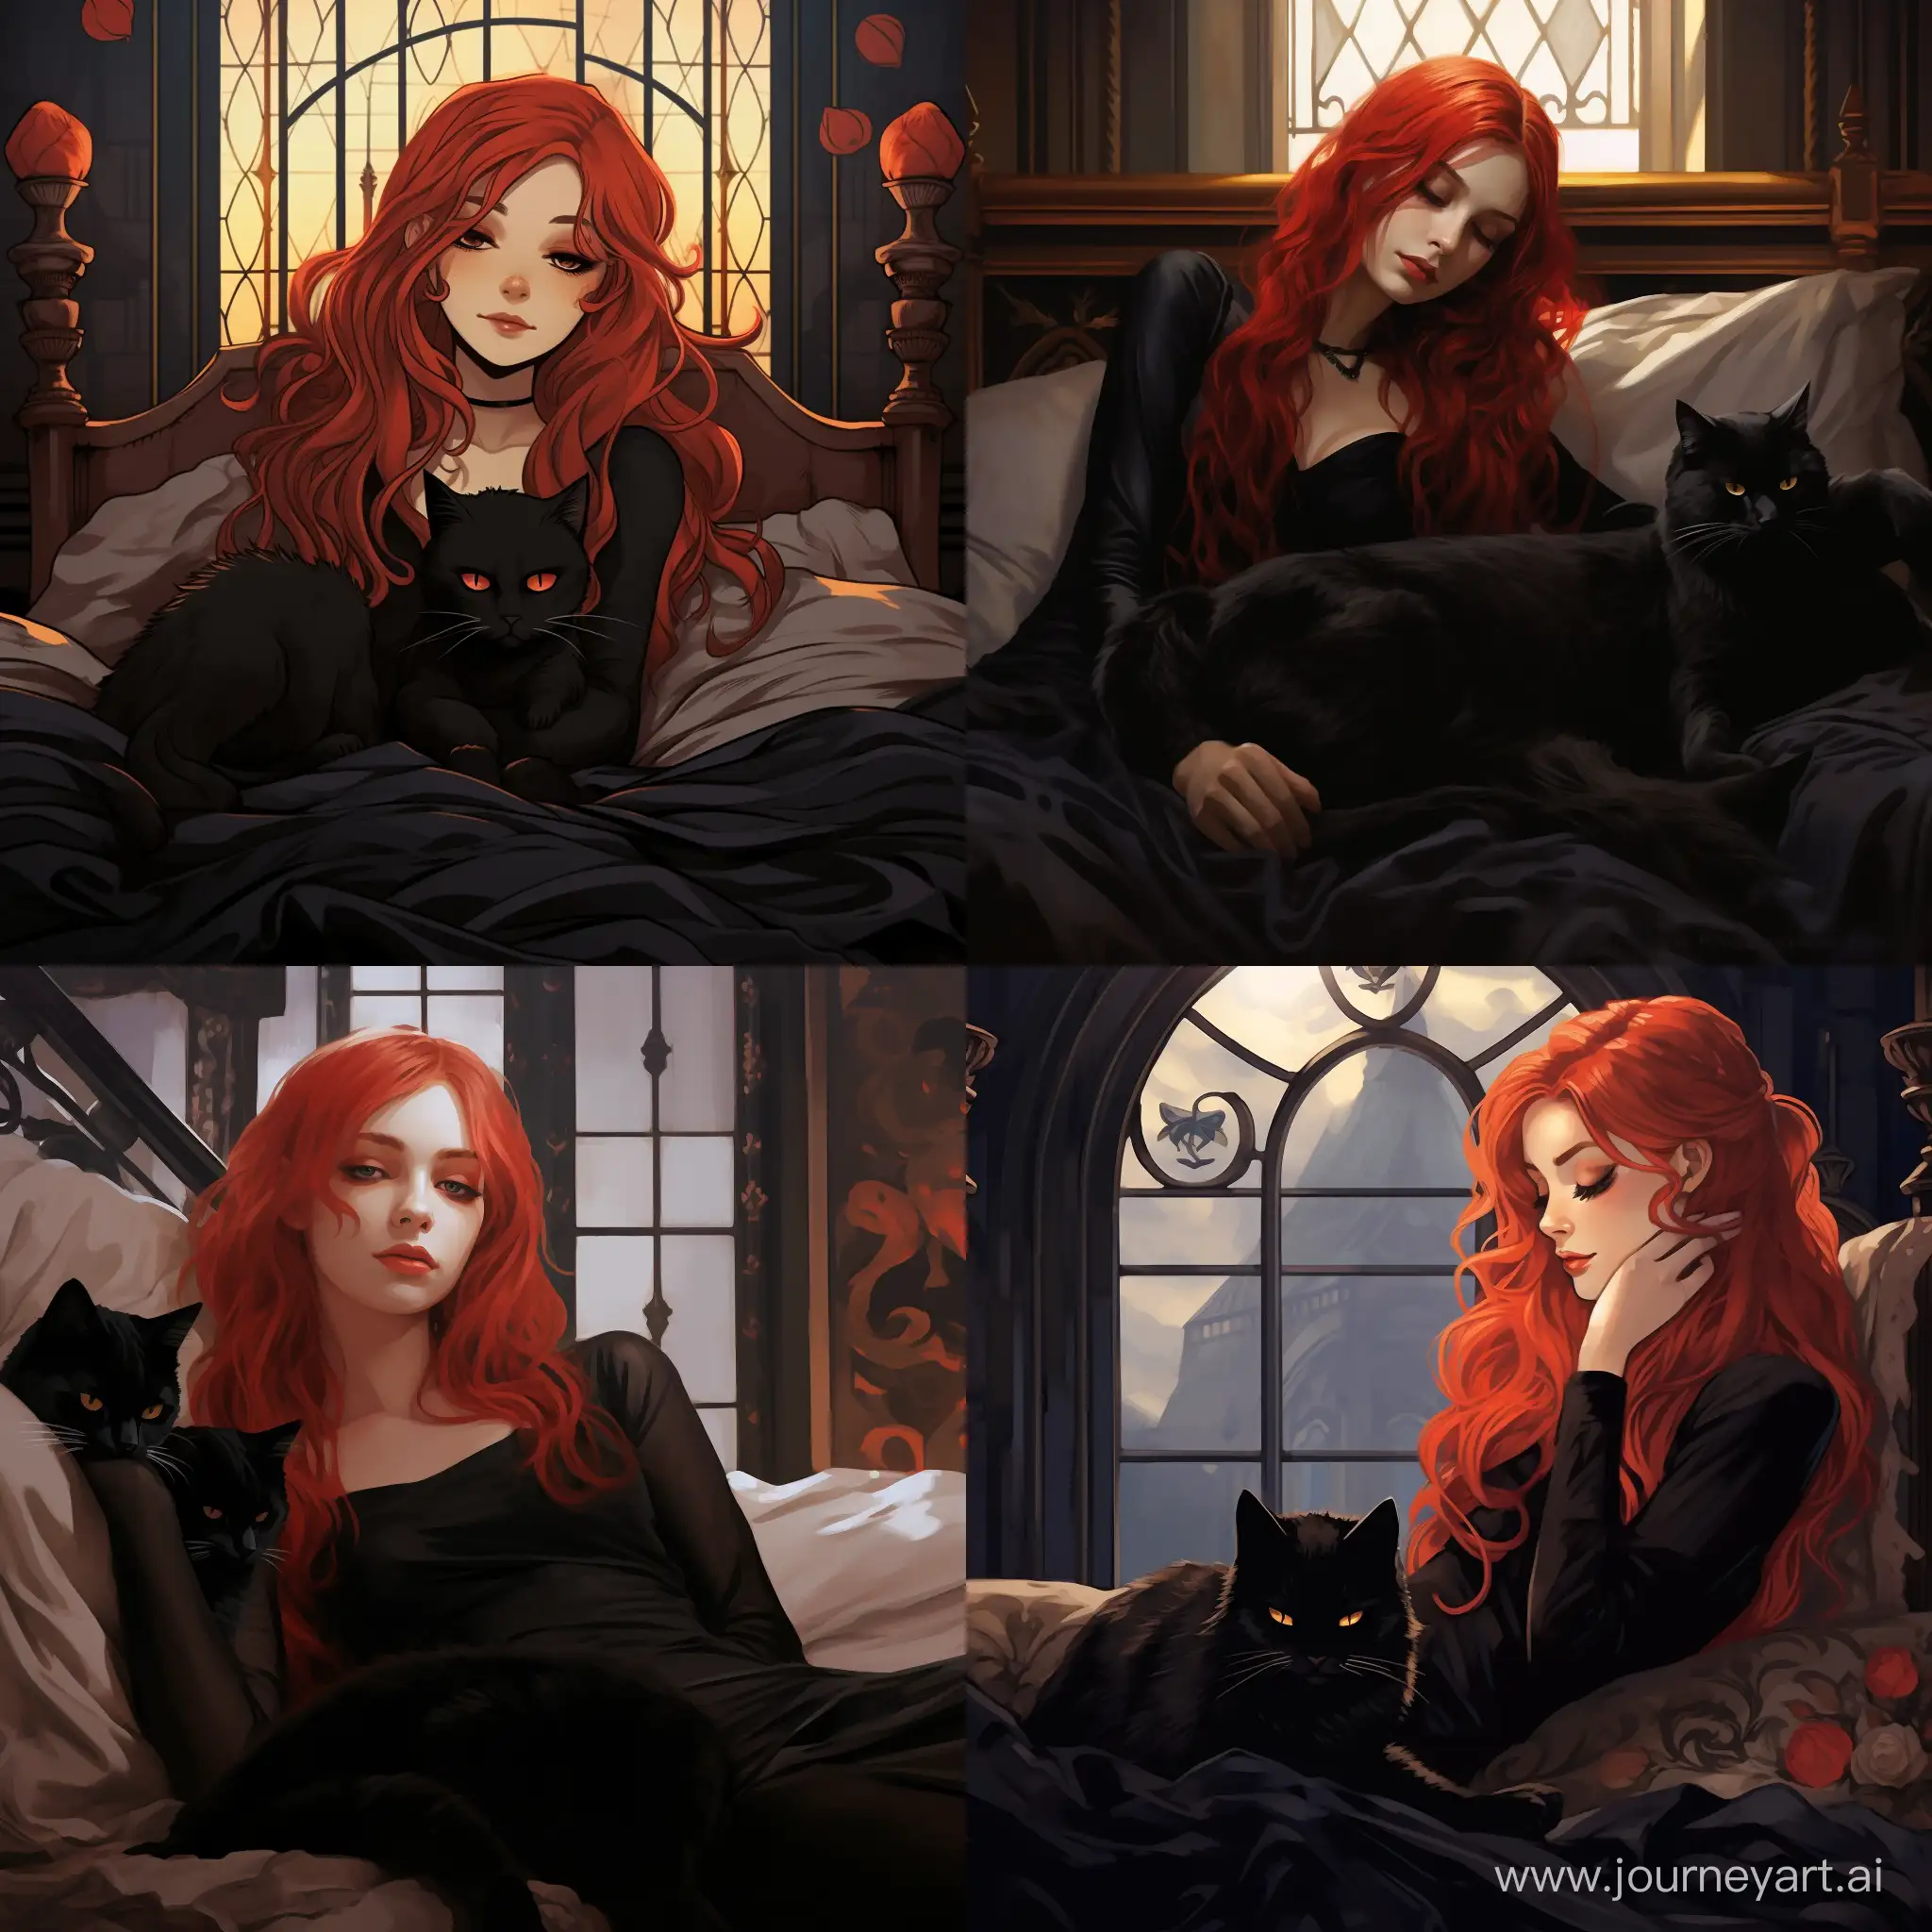 Enchanting-Gothic-Dream-RedHaired-Girl-and-Feline-Companion-in-Slumber